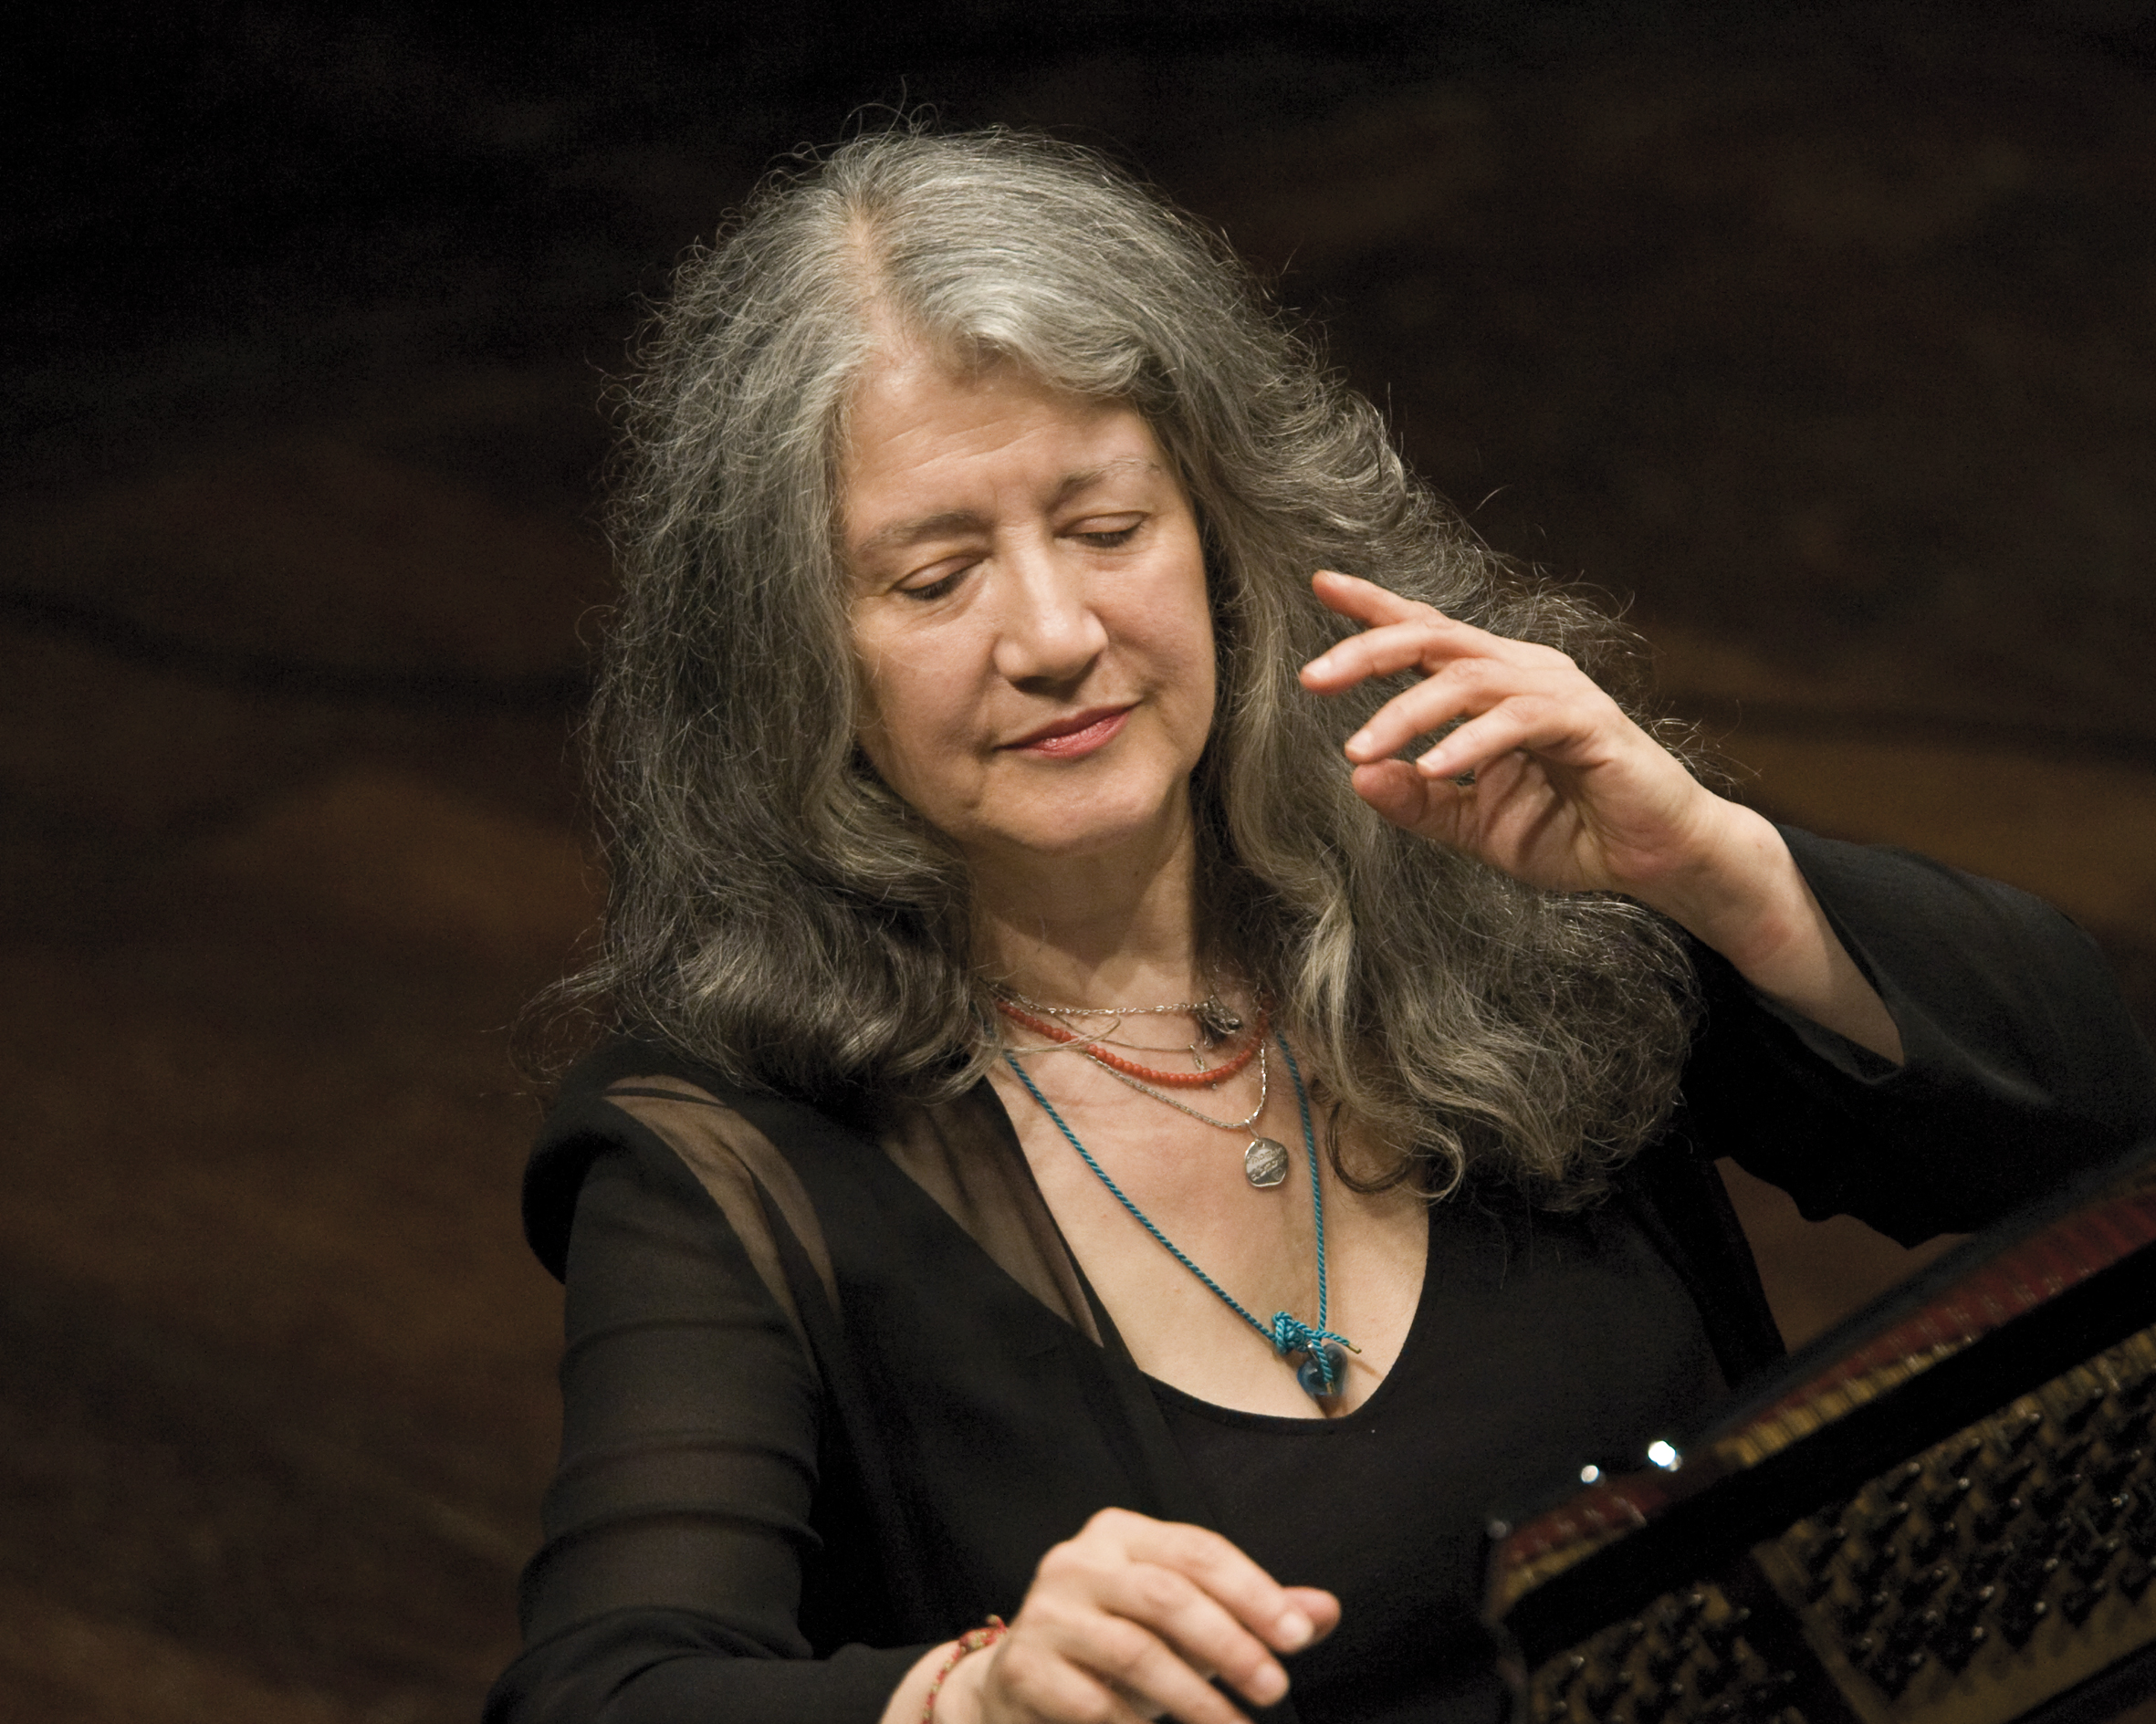 Portrait shot of pianist Martha Argerich while playing the piano with both hands raised in one motion.